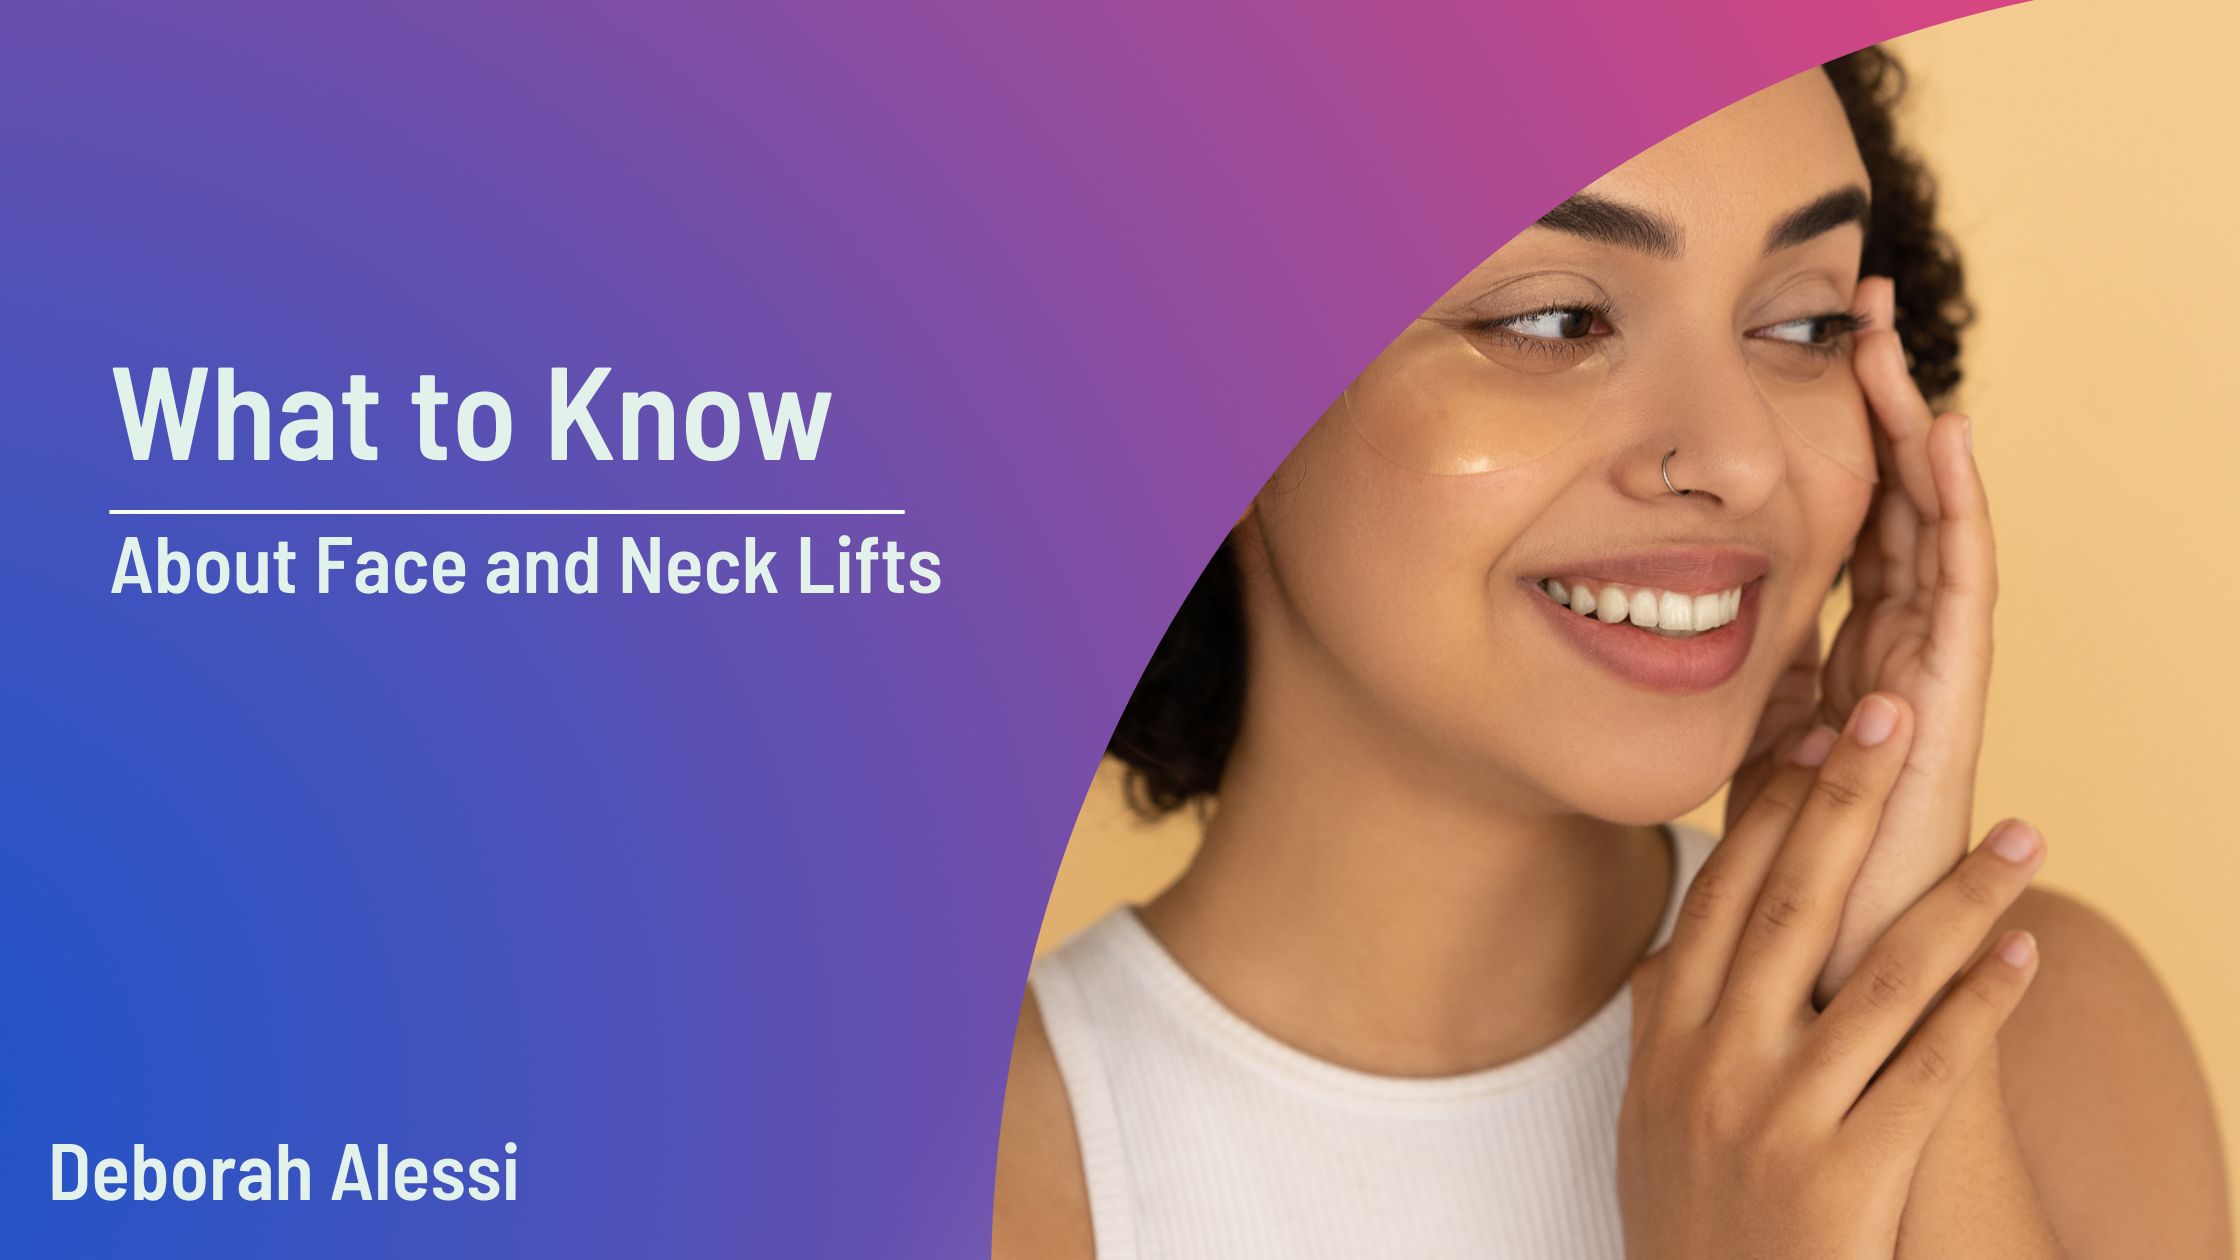 What to Know About Face and Neck Lifts